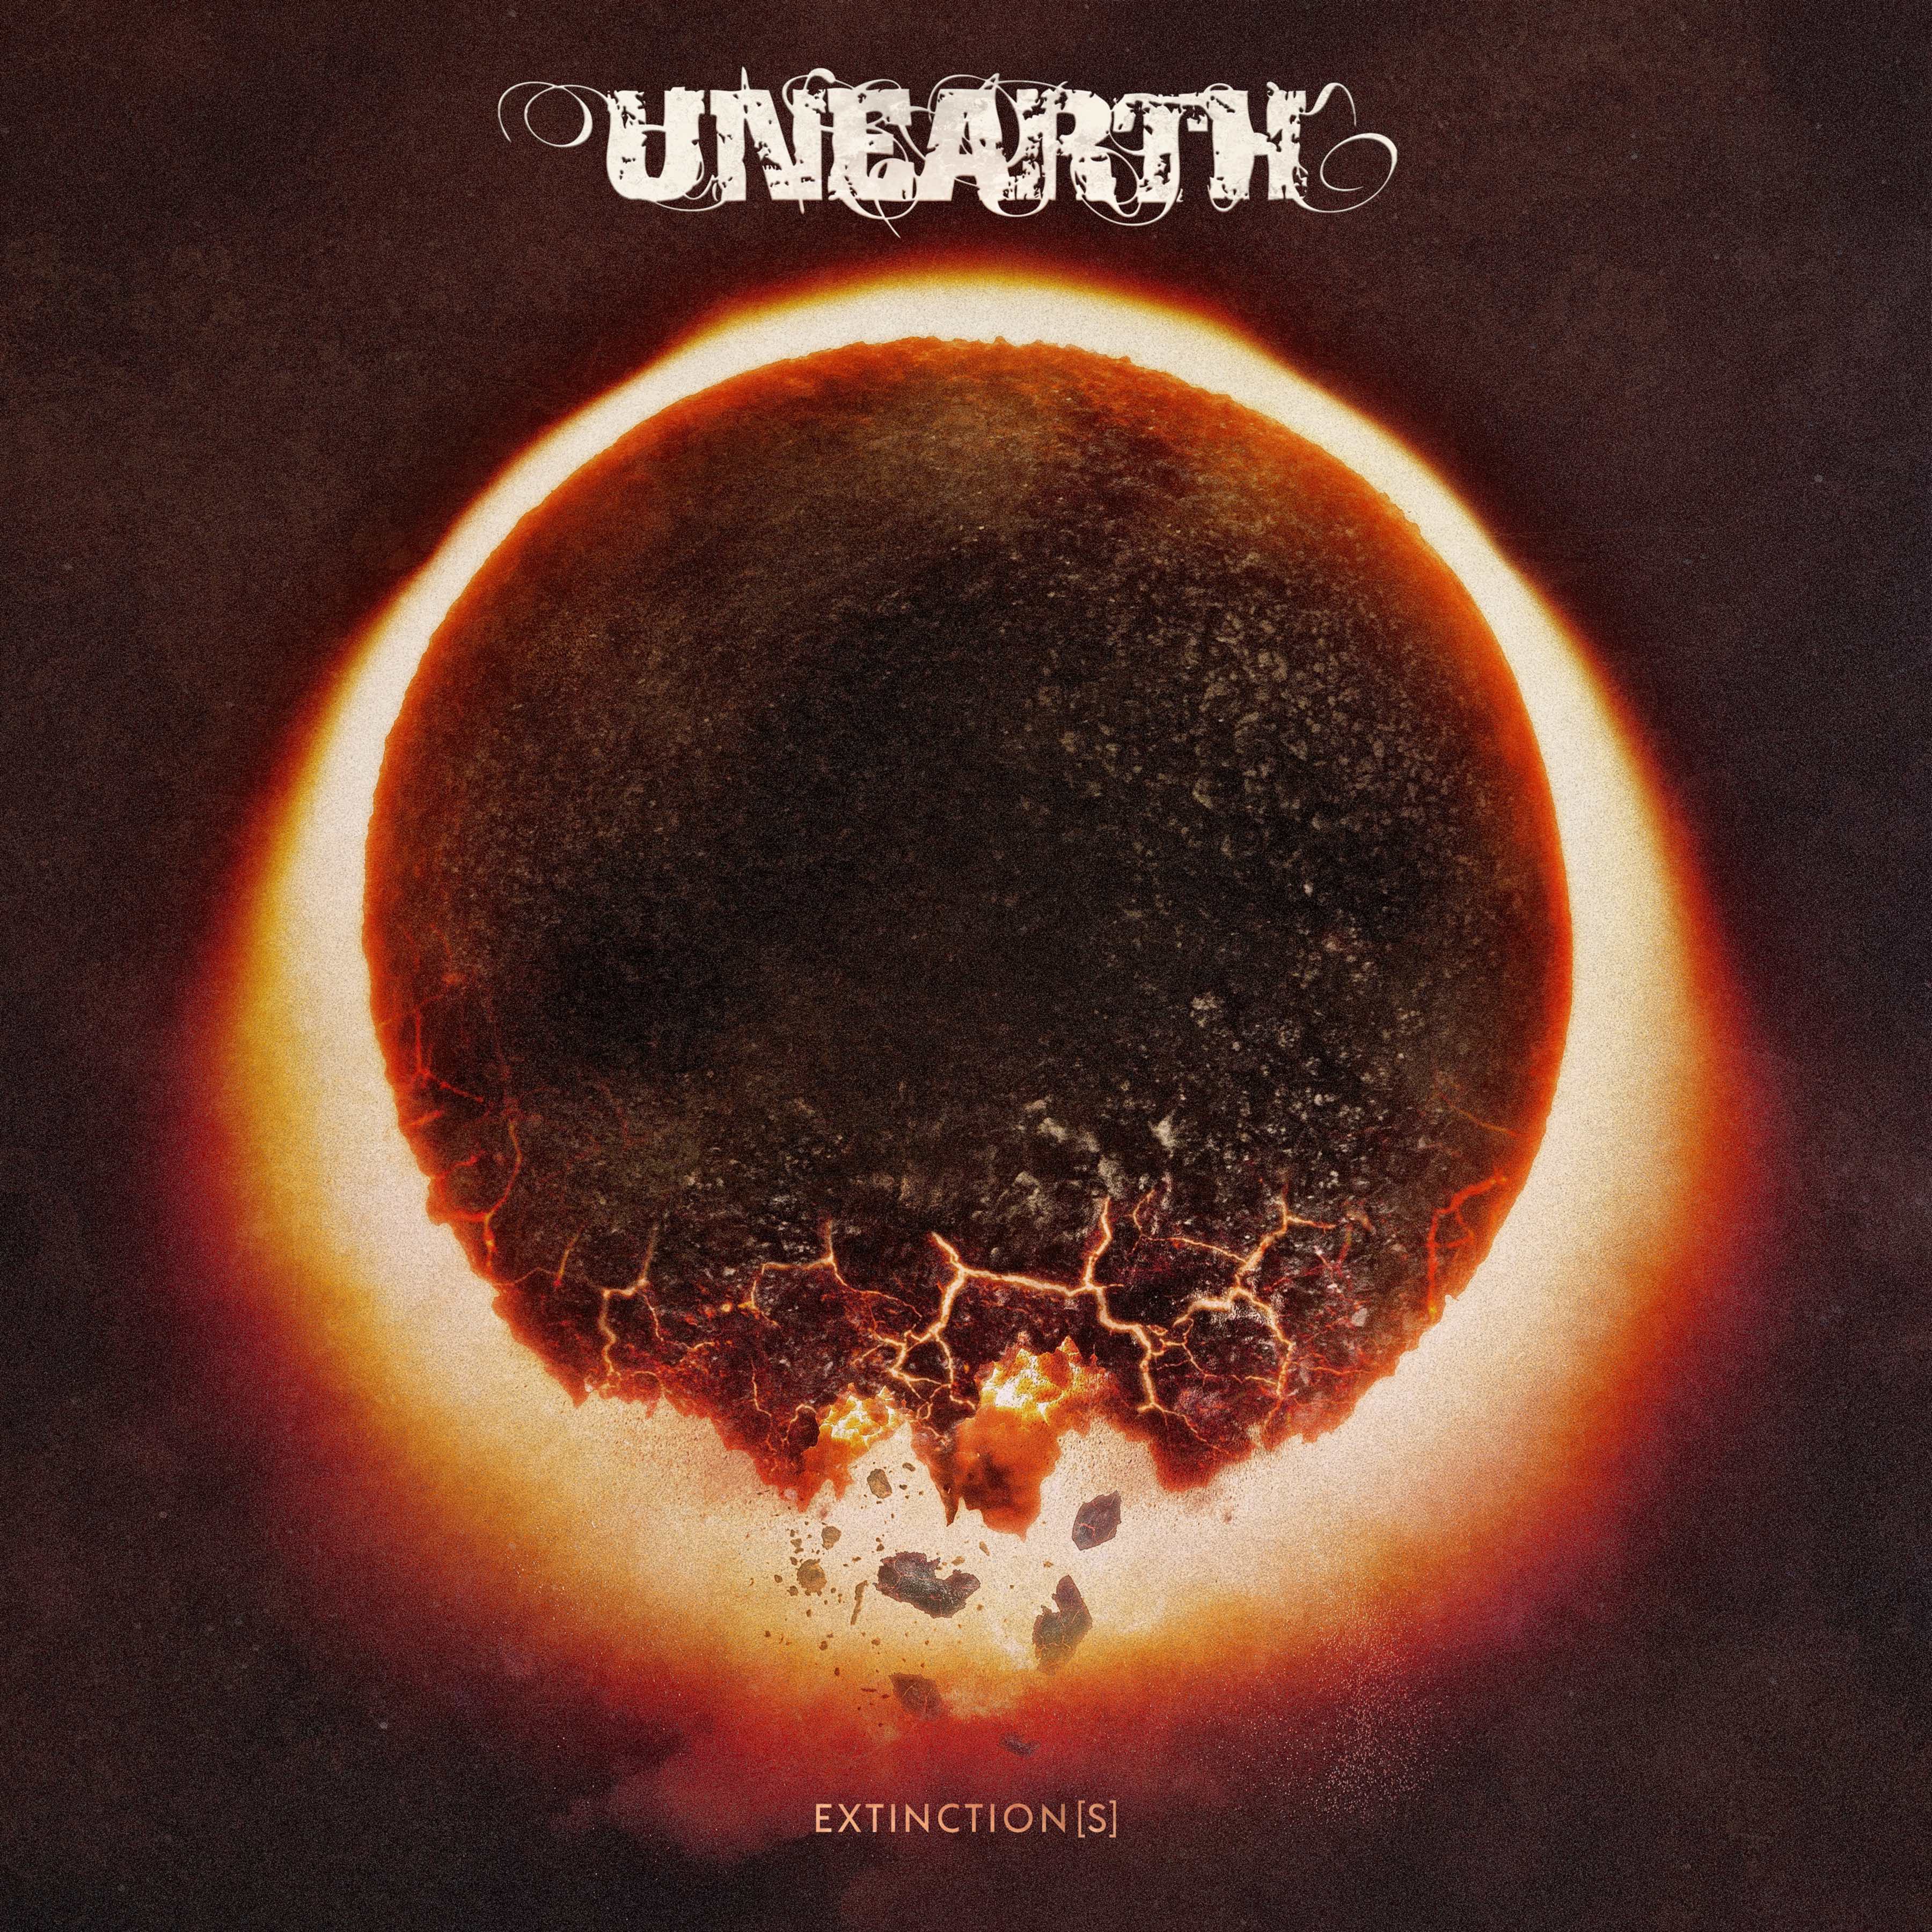 Unearth premiere “One With the Sun” music video